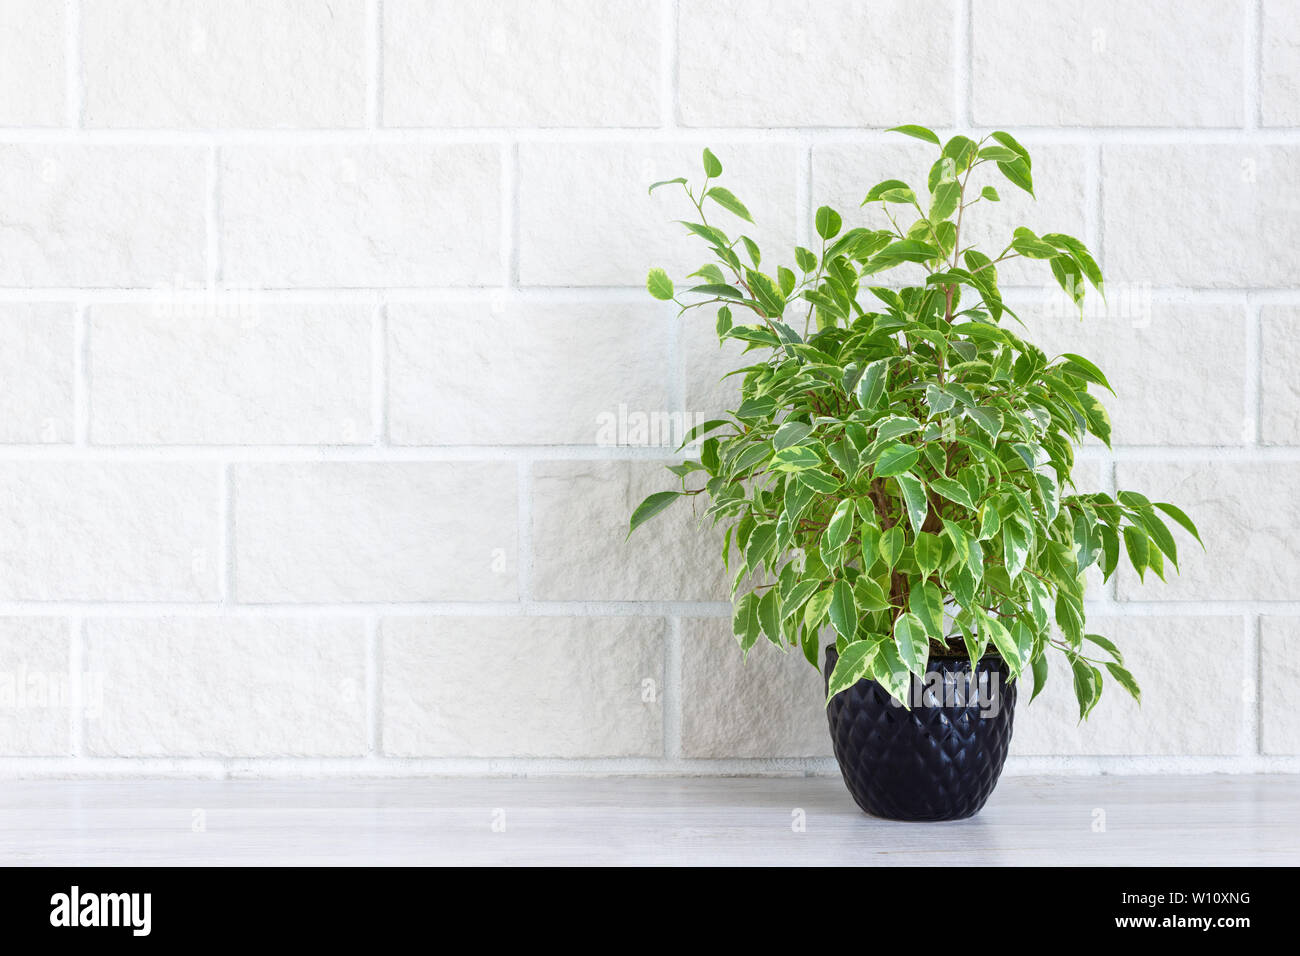 Home Decor Indoor Green Plant In Flower Pot On White Brick Wall Background Copy Space Stock Photo Alamy